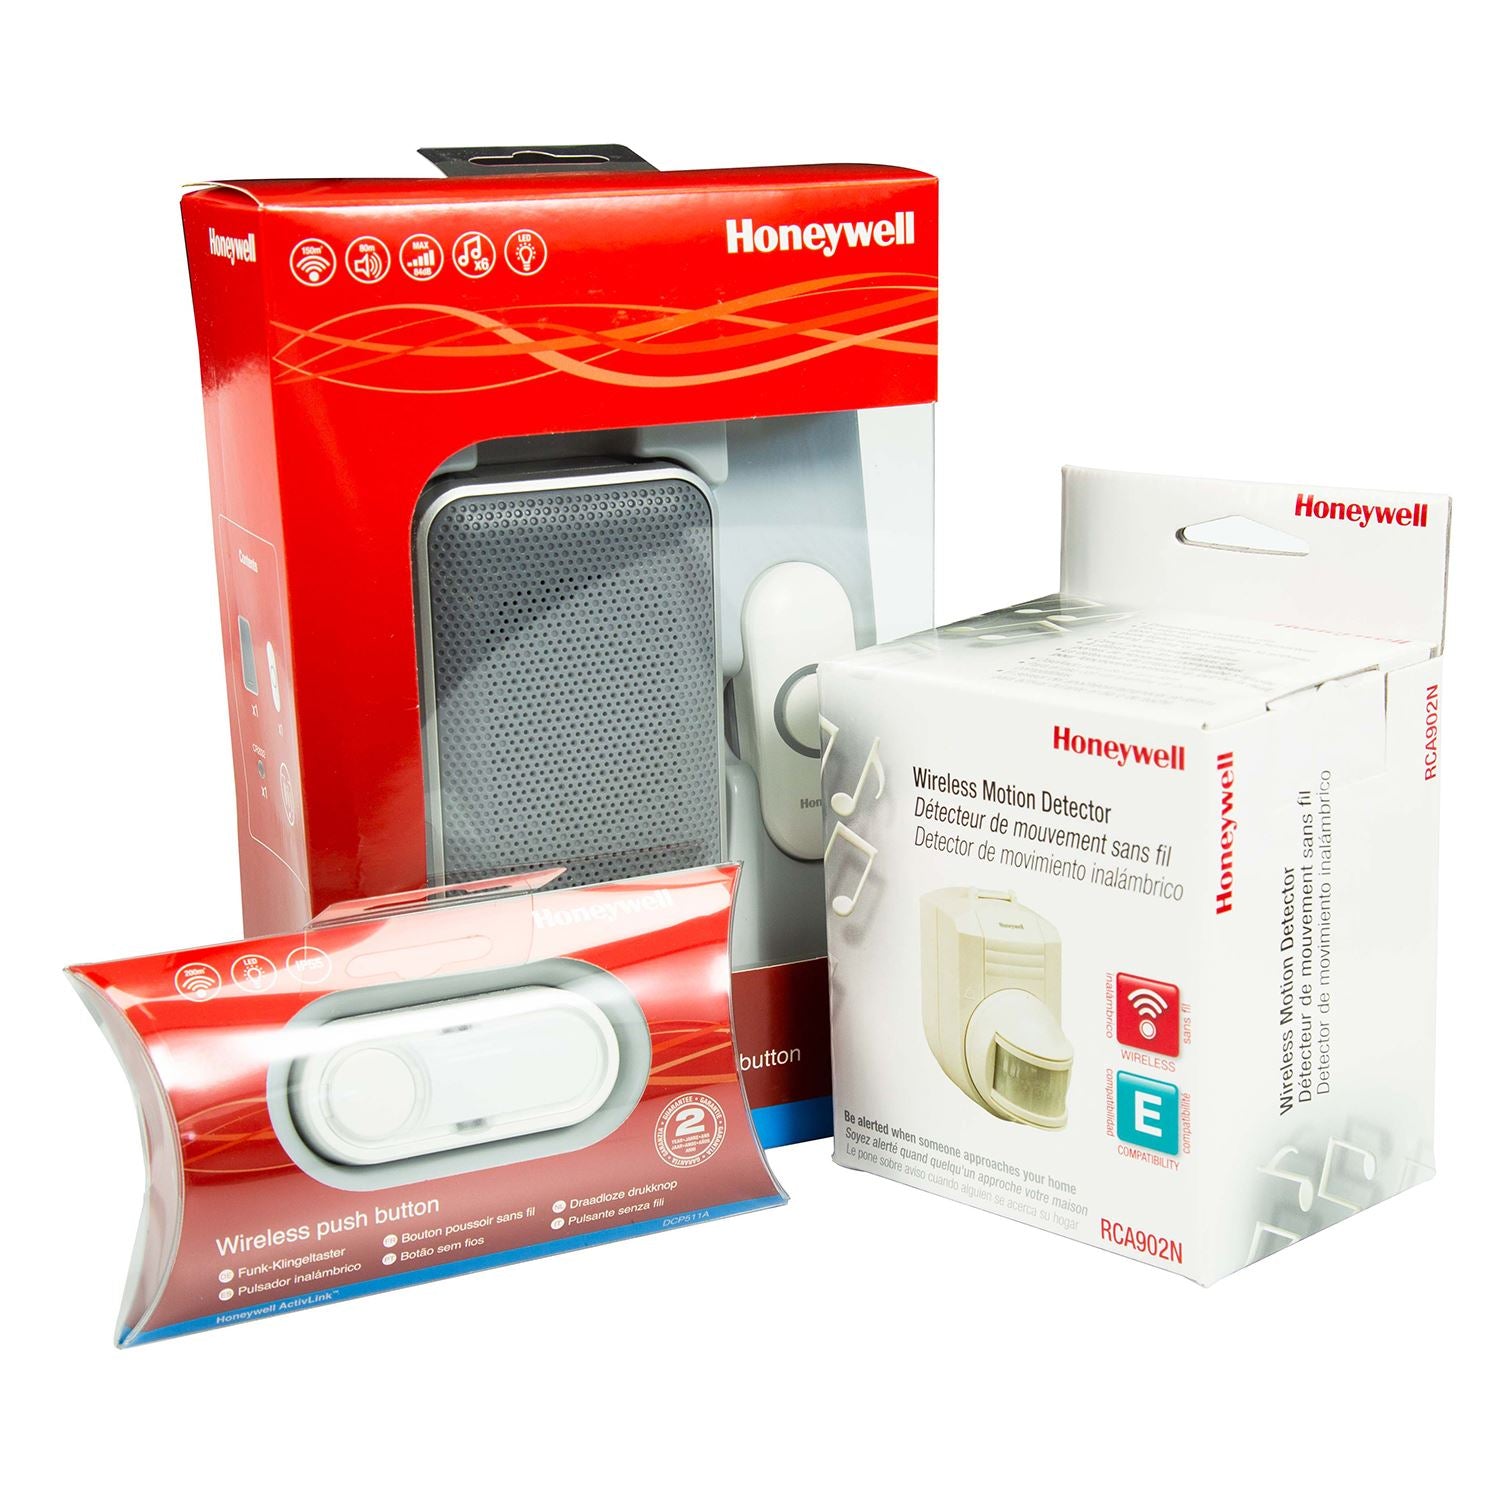 HONEYWELL_Wireless_Series_3_Portable_Doorbell_Bundle._Includes_2x_Wireless_Push_Buttons_(HONDCP511GA)_&_1x_Motion_Detector_(HONRCA902A)._Up_to_150m_Range,